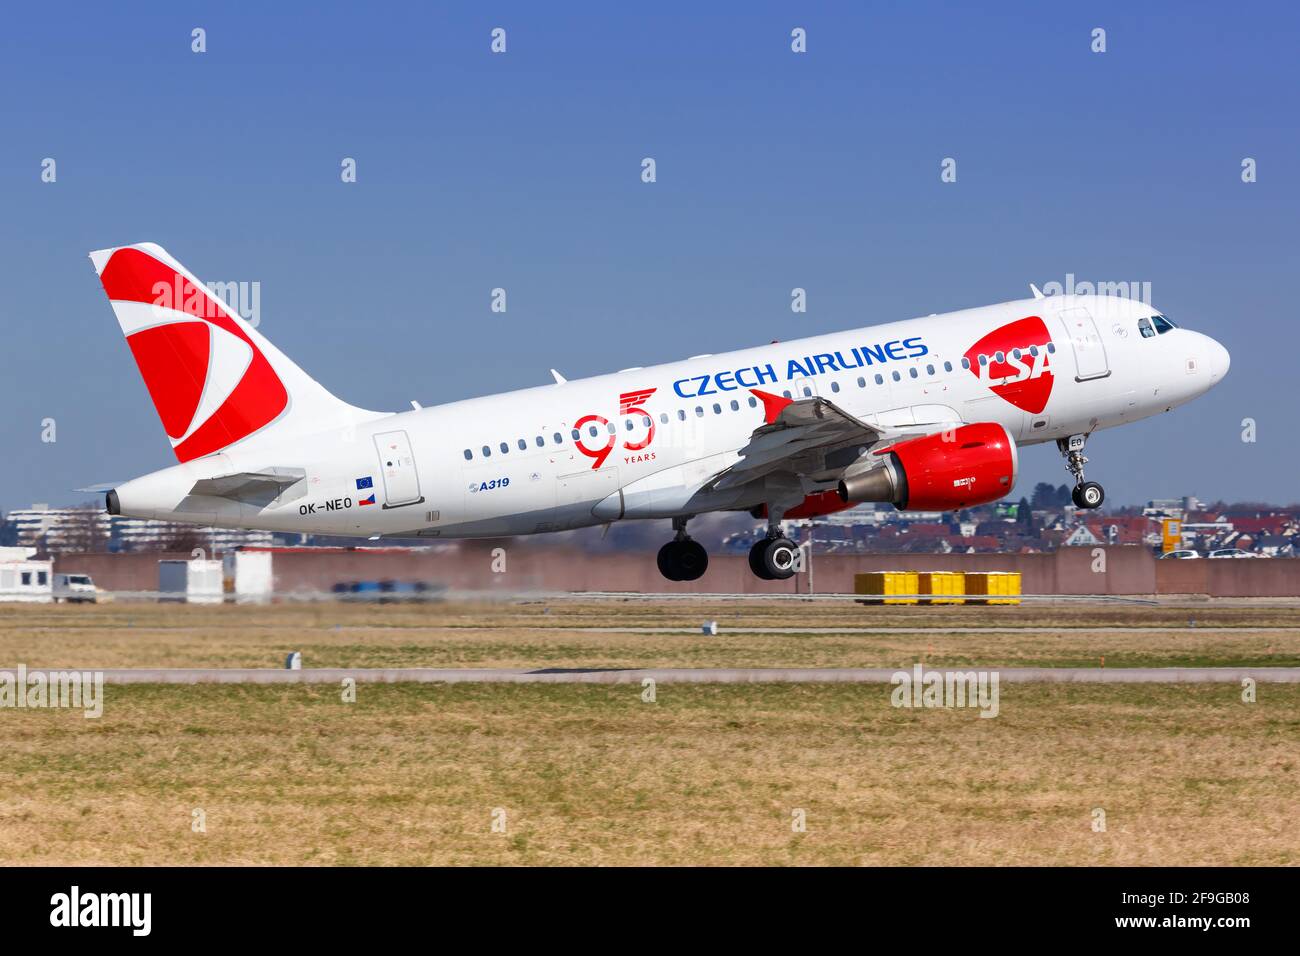 Stuttgart, Germany - April 6, 2018: CSA Czech Airlines Airbus A319 airplane at Stuttgart airport (STR) in Germany. Stock Photo